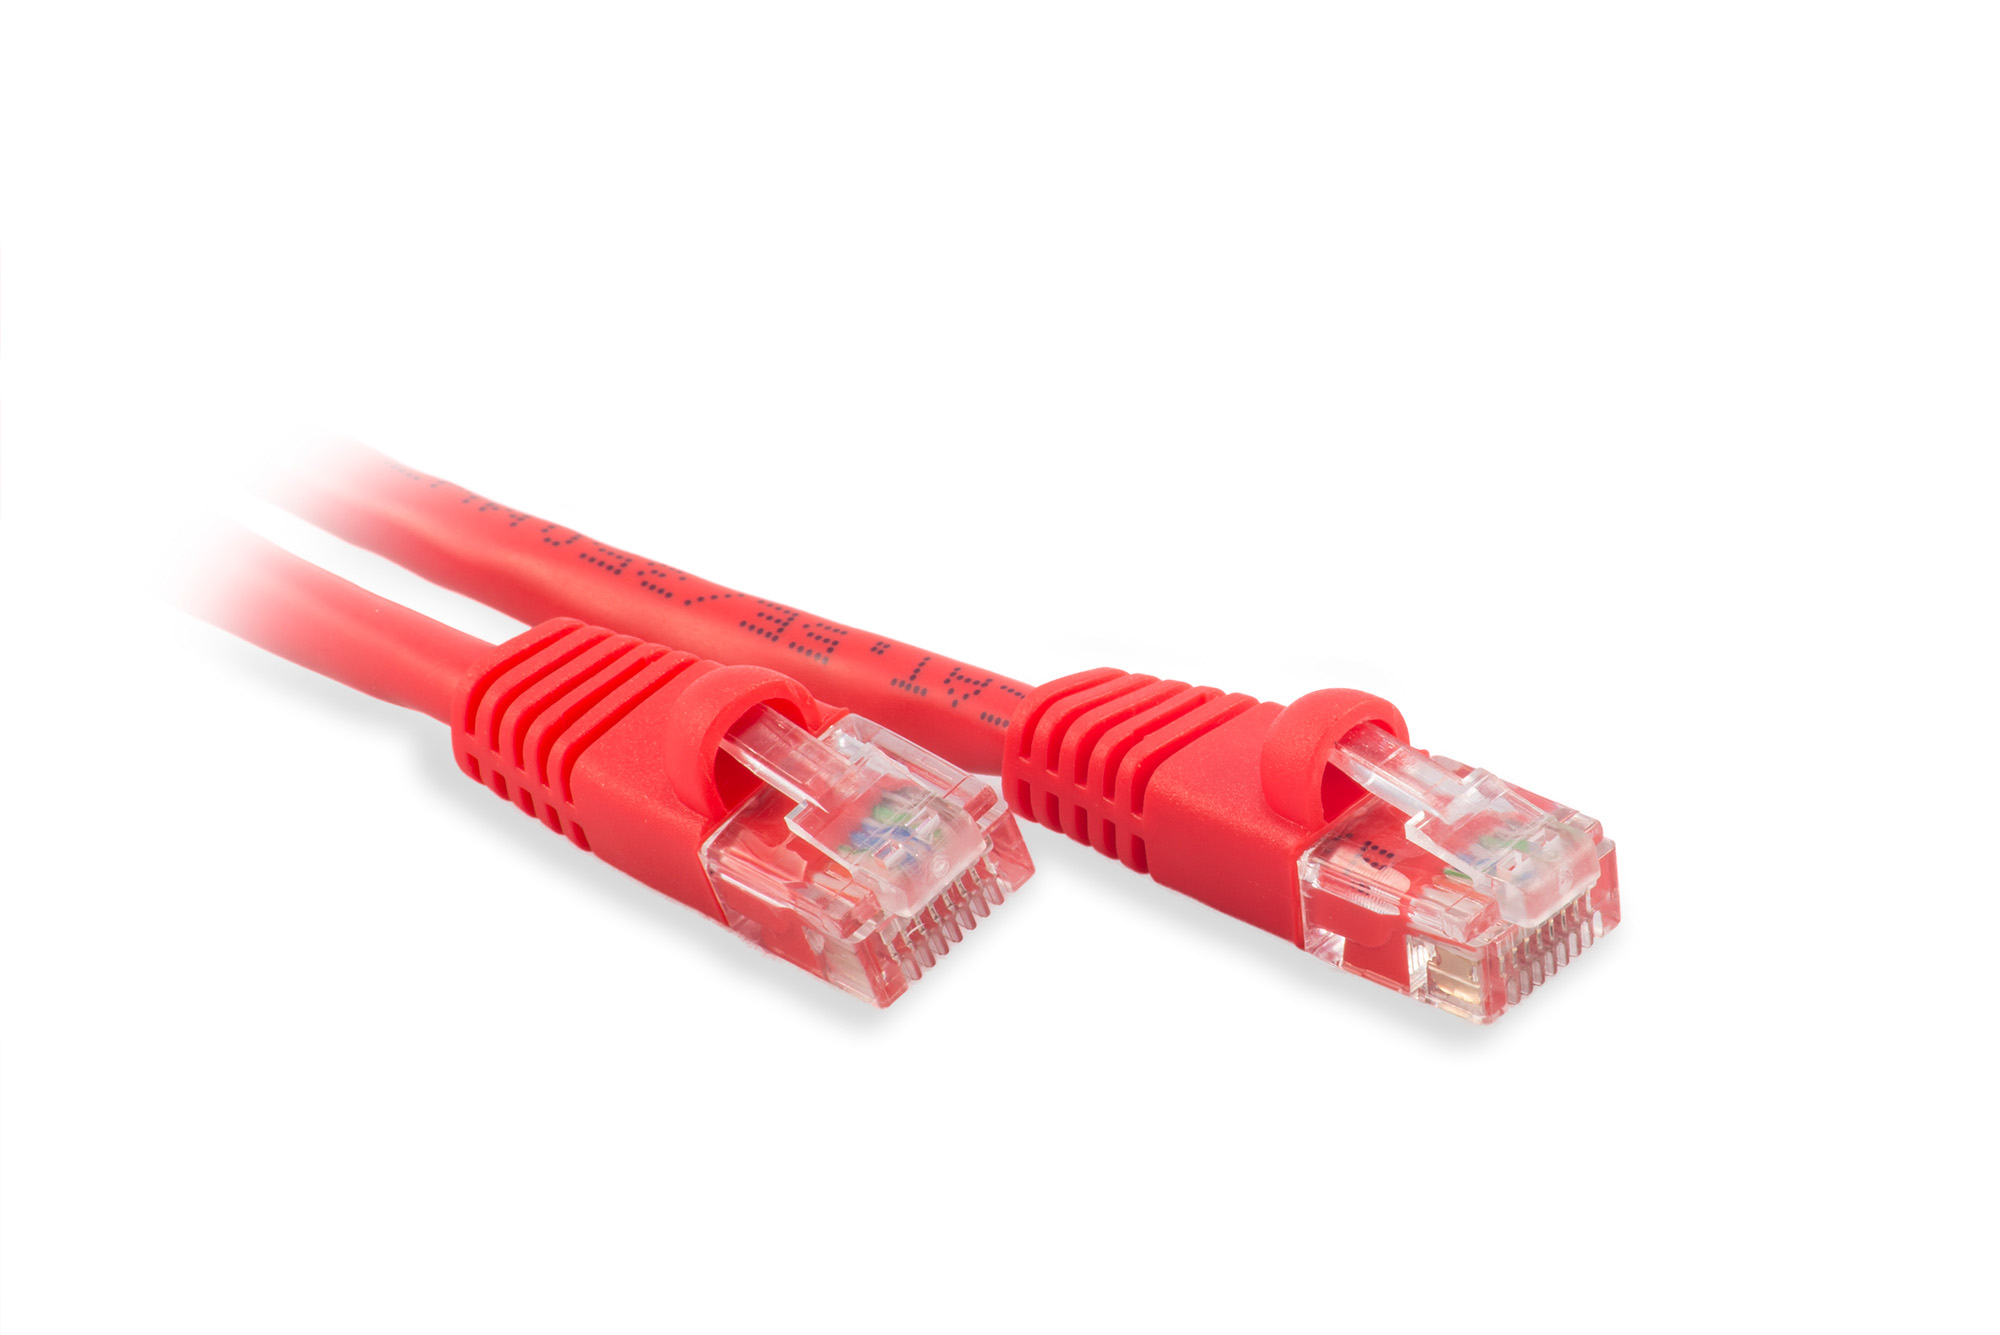 50ft Cat5e Ethernet Patch Cable - Red Color - Snagless Boot, Stranded, RJ45, 350Mhz, 24AWG